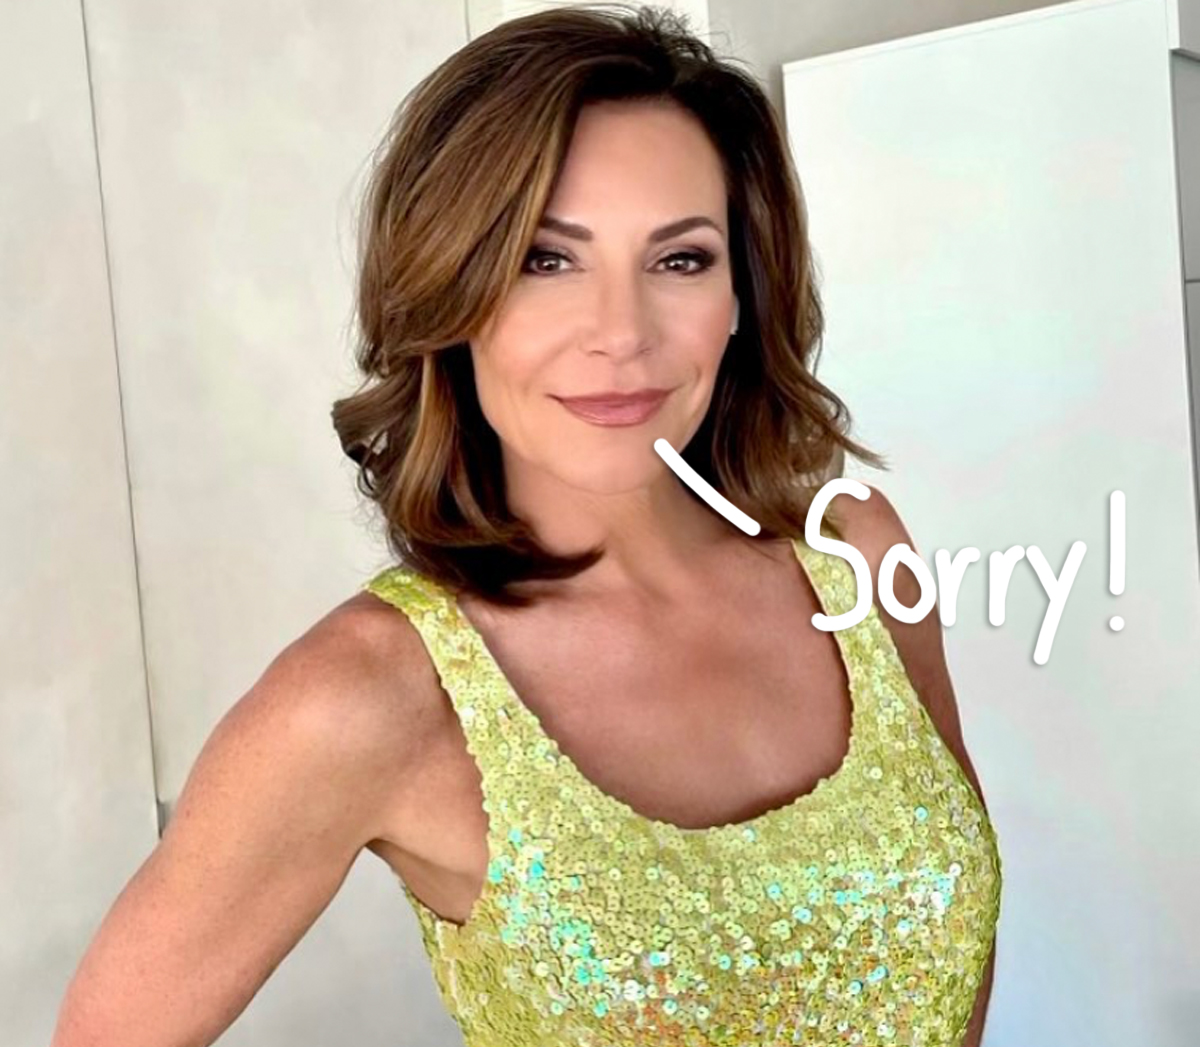 #Luann De Lesseps Apologizes After Drunken Performance Got Her Kicked Out Of NYC Bar